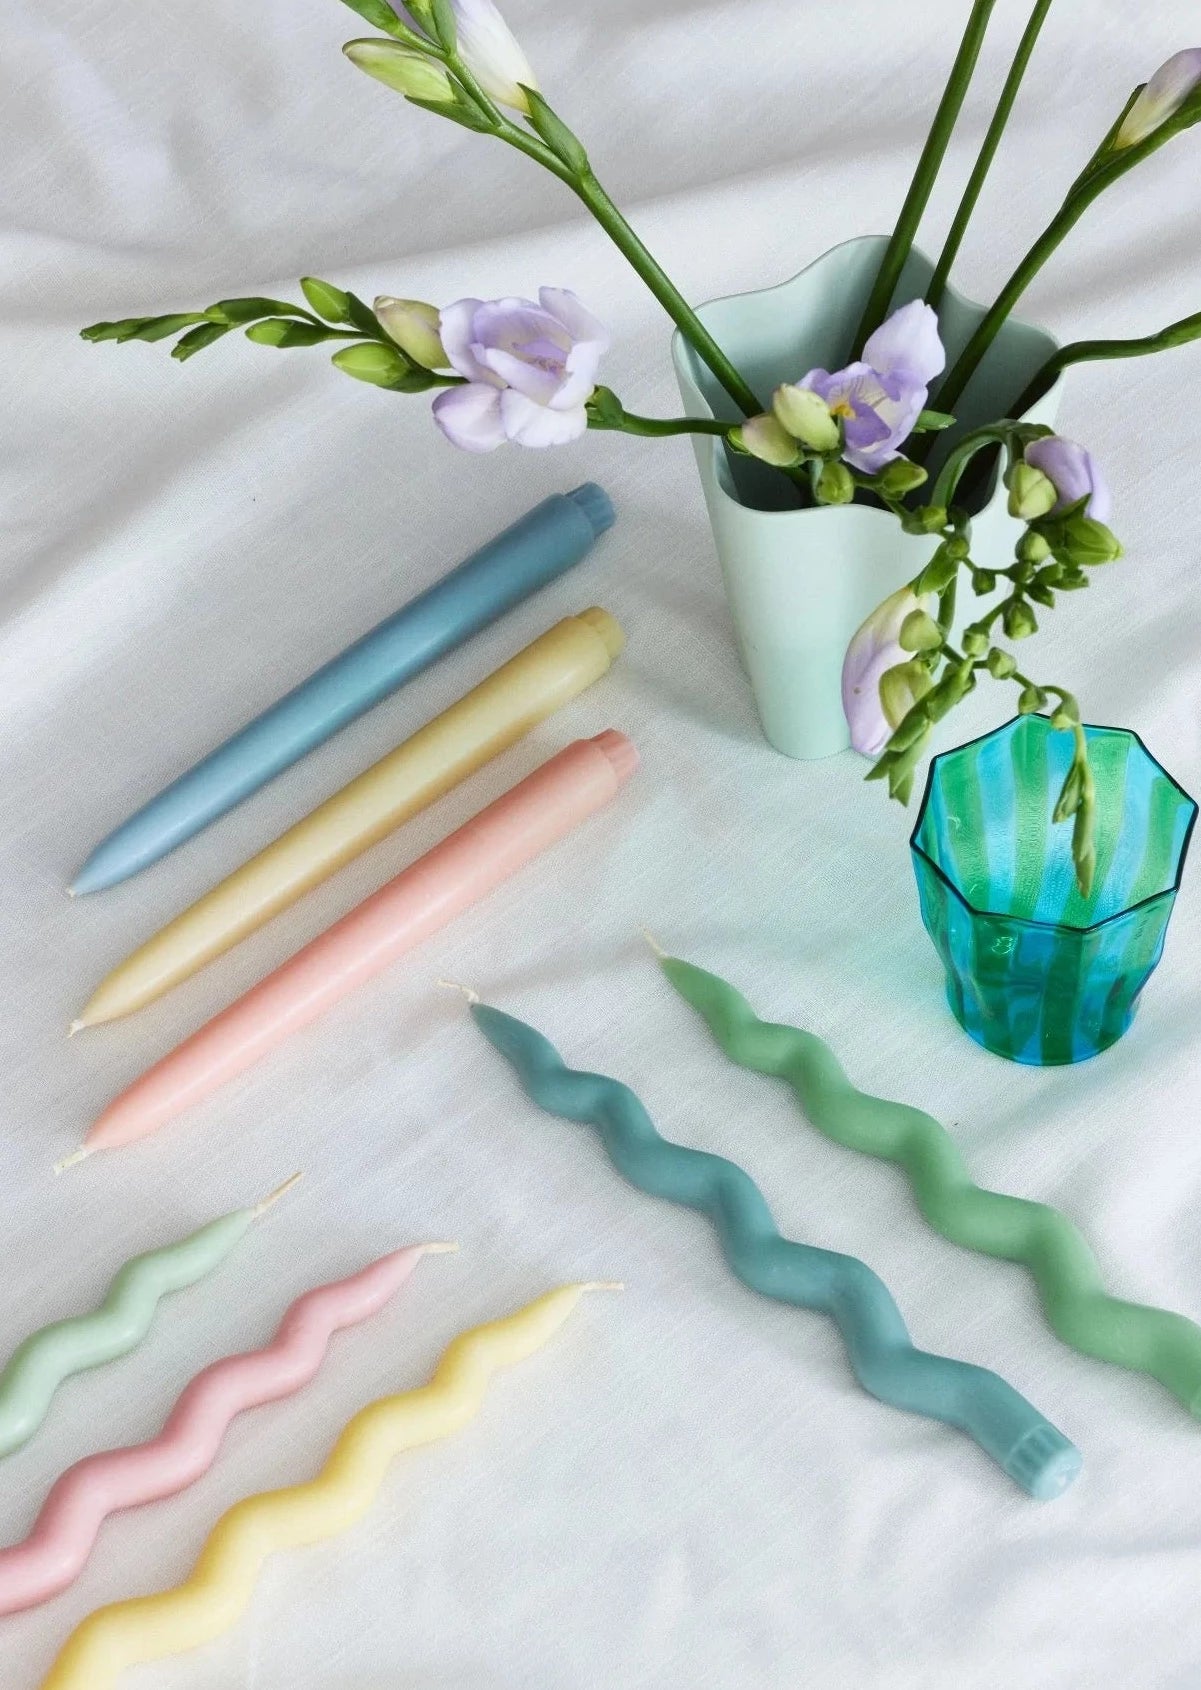 Twinkling Taper Candle Set - Pastel Pops